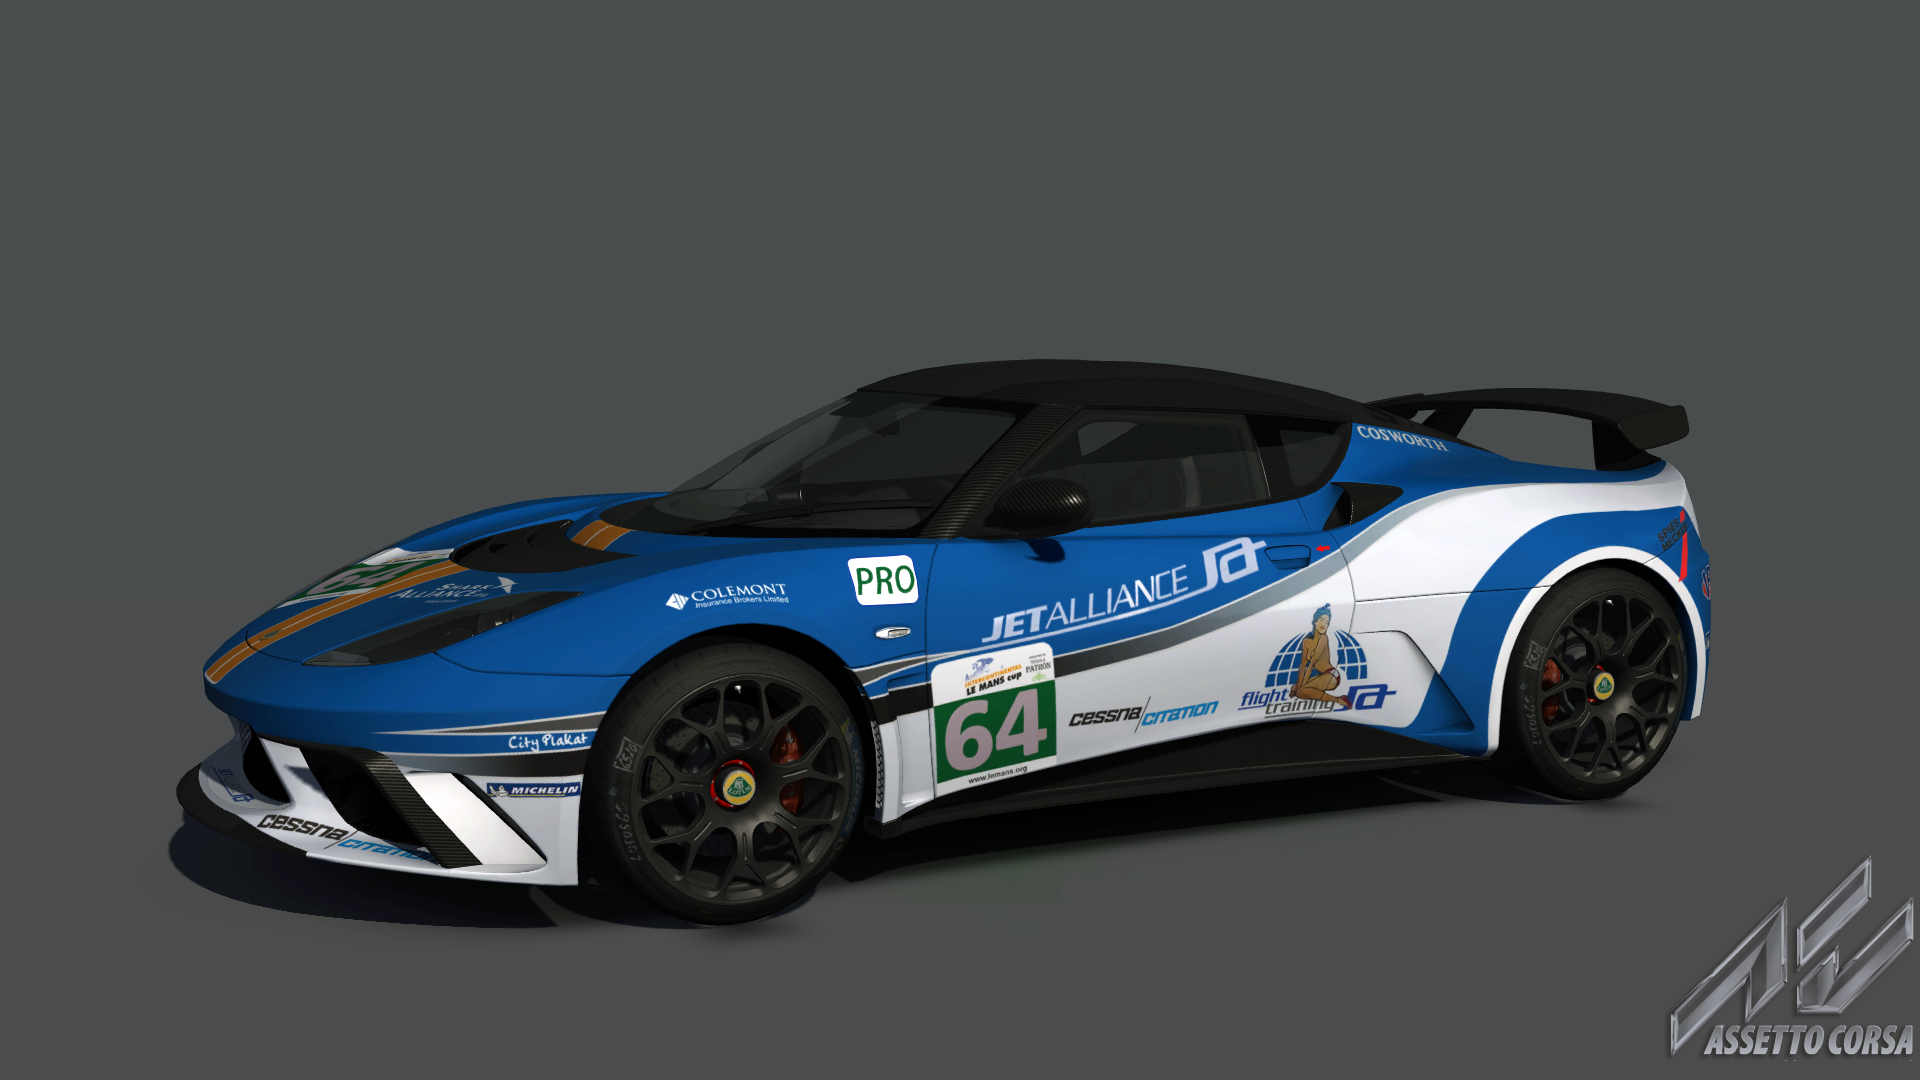 showroom_lotus_evora_gte_14_2_2014_18_3_44_by_flashcrow-d76dnqp.png